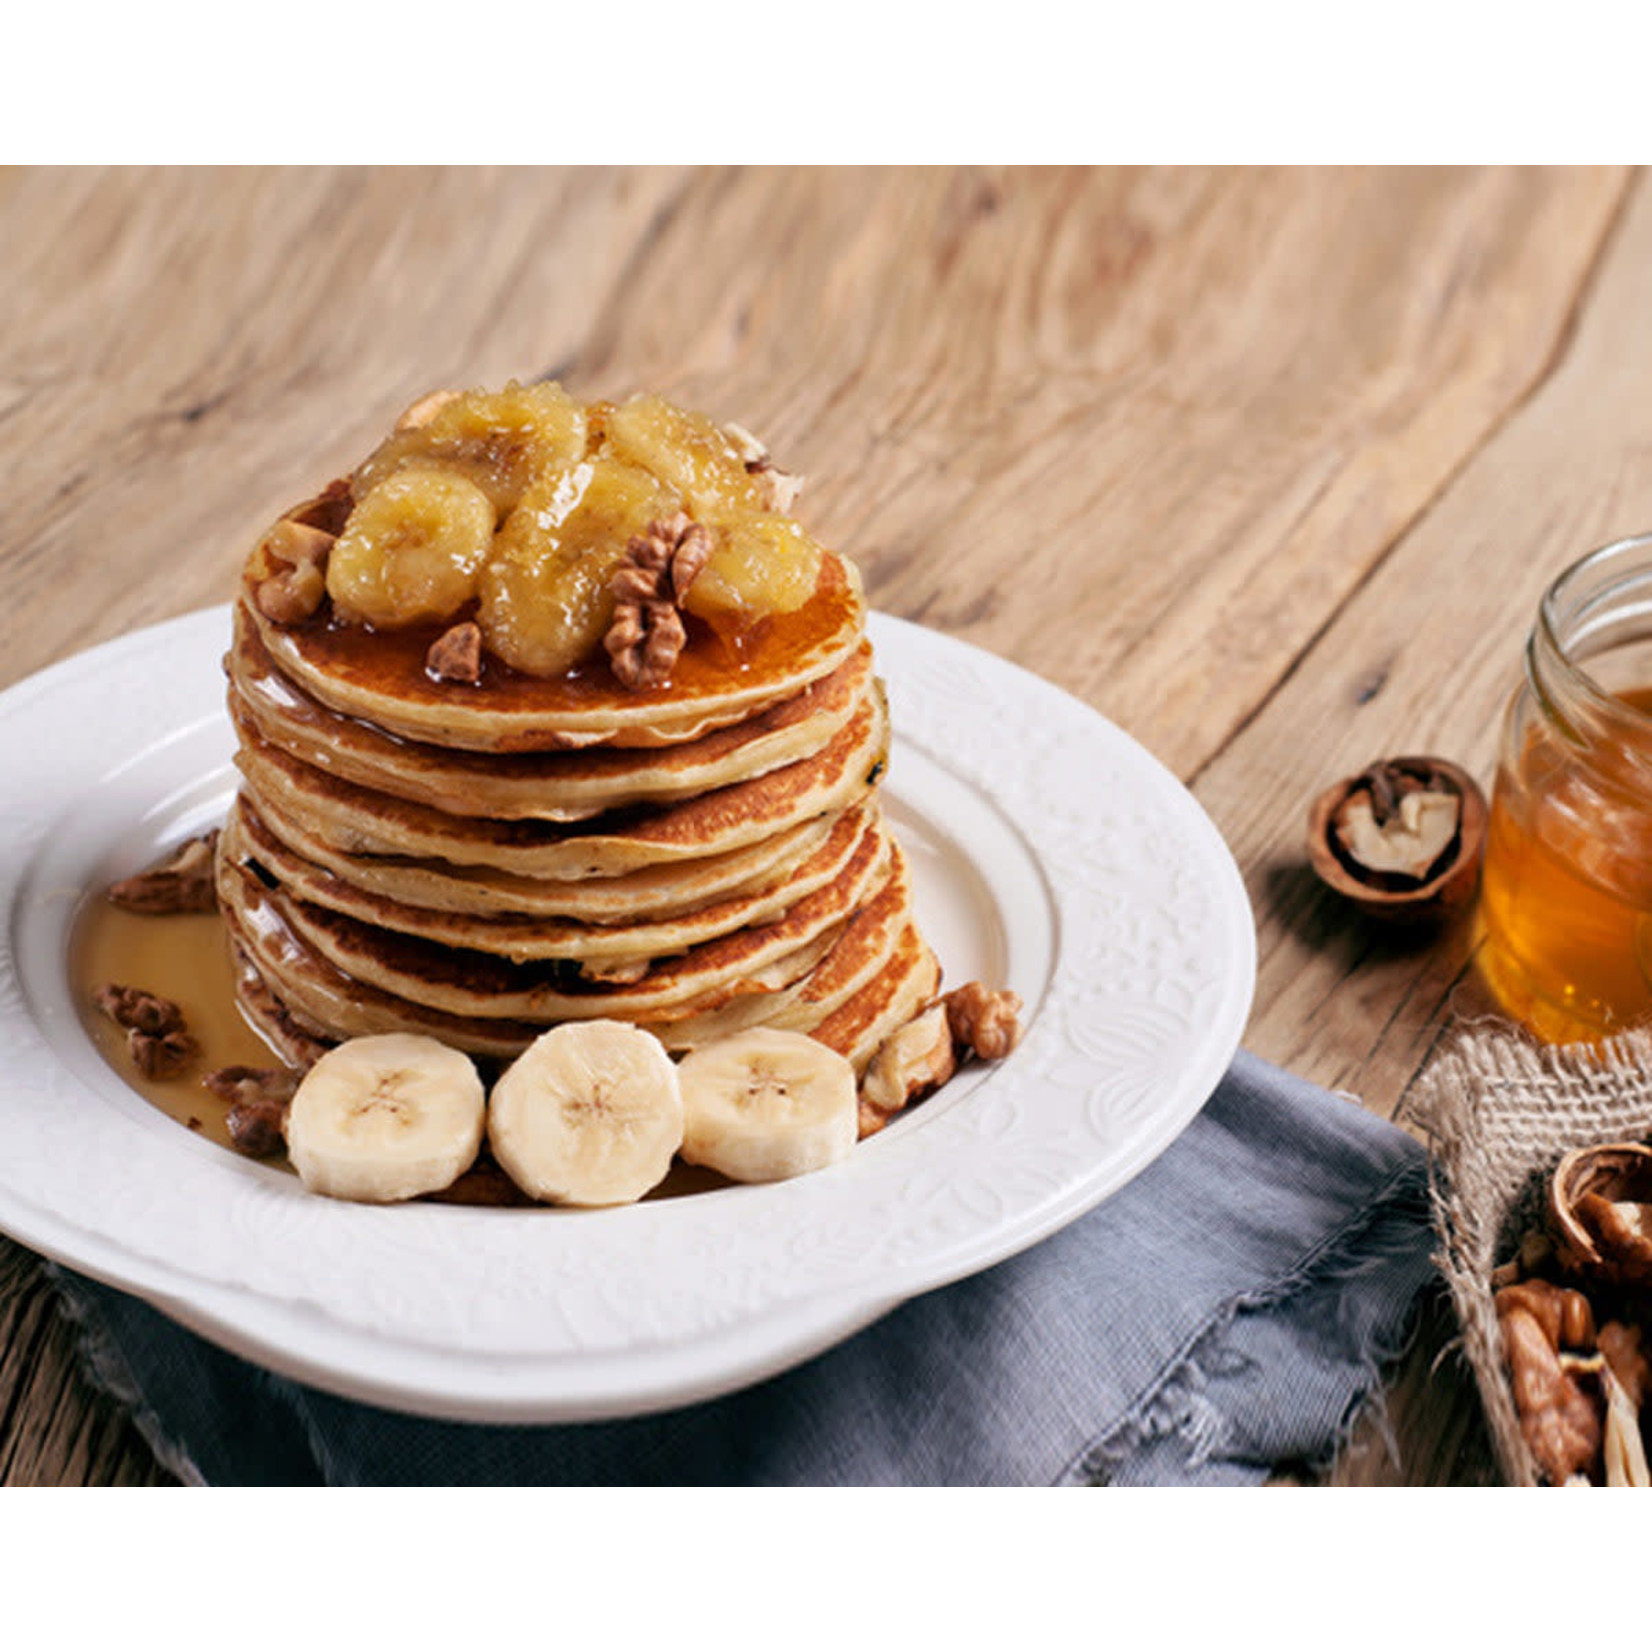 Yes You Can Yes You Can Vegan & Gluten Free Pancake Mix Ancient Grains